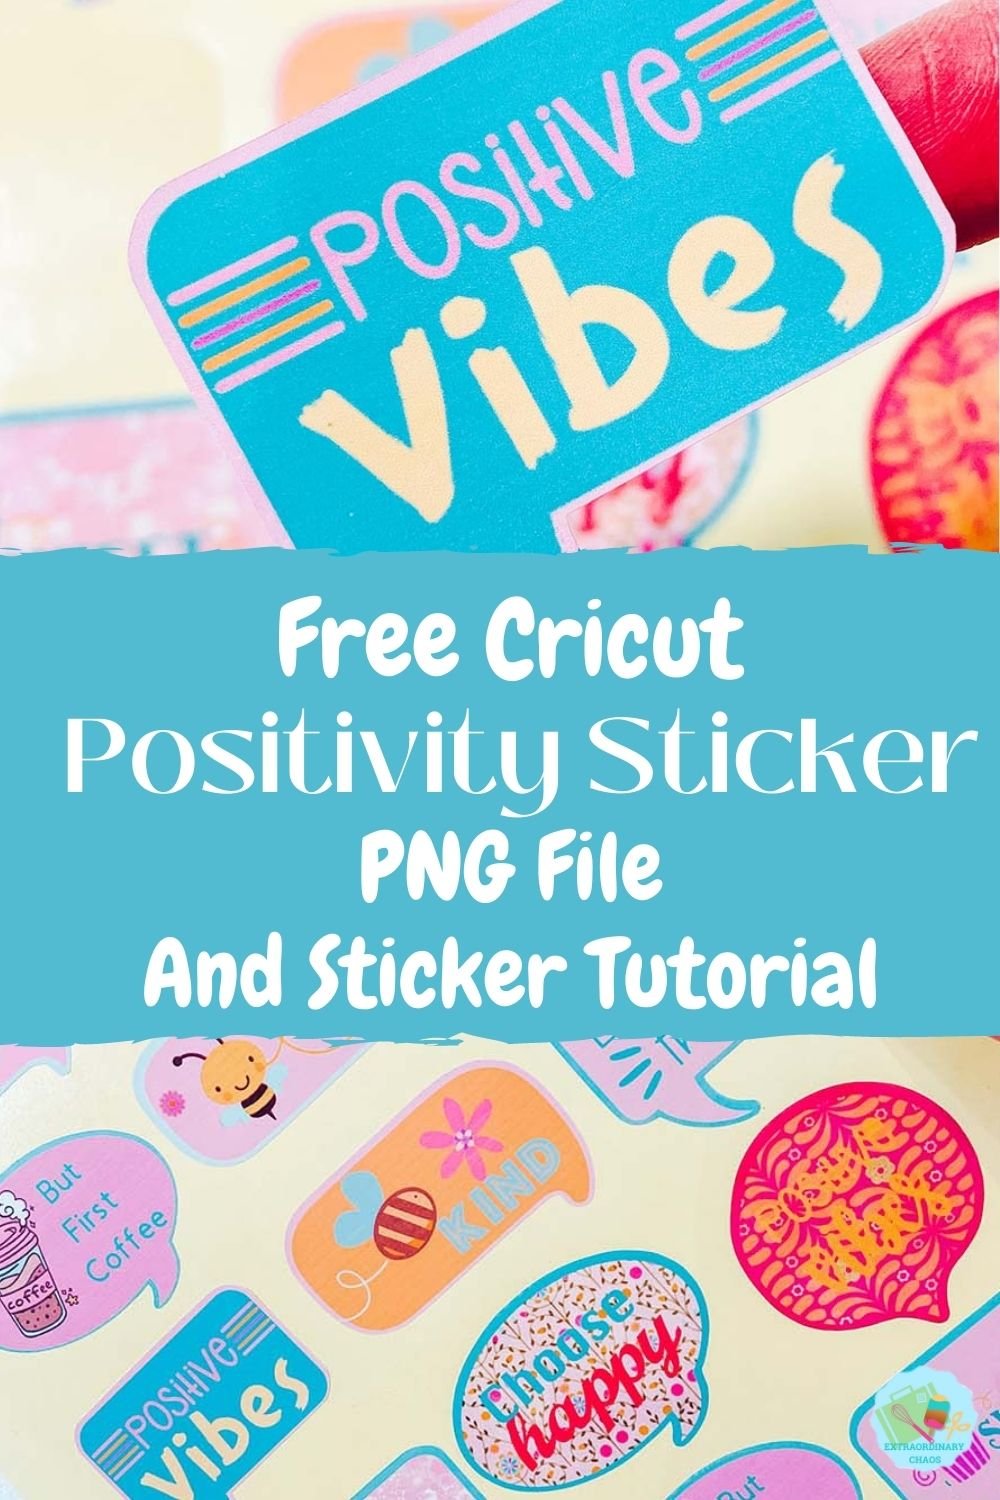 Free sticker png file and step by step Cricut sticker and offset tool tutorial